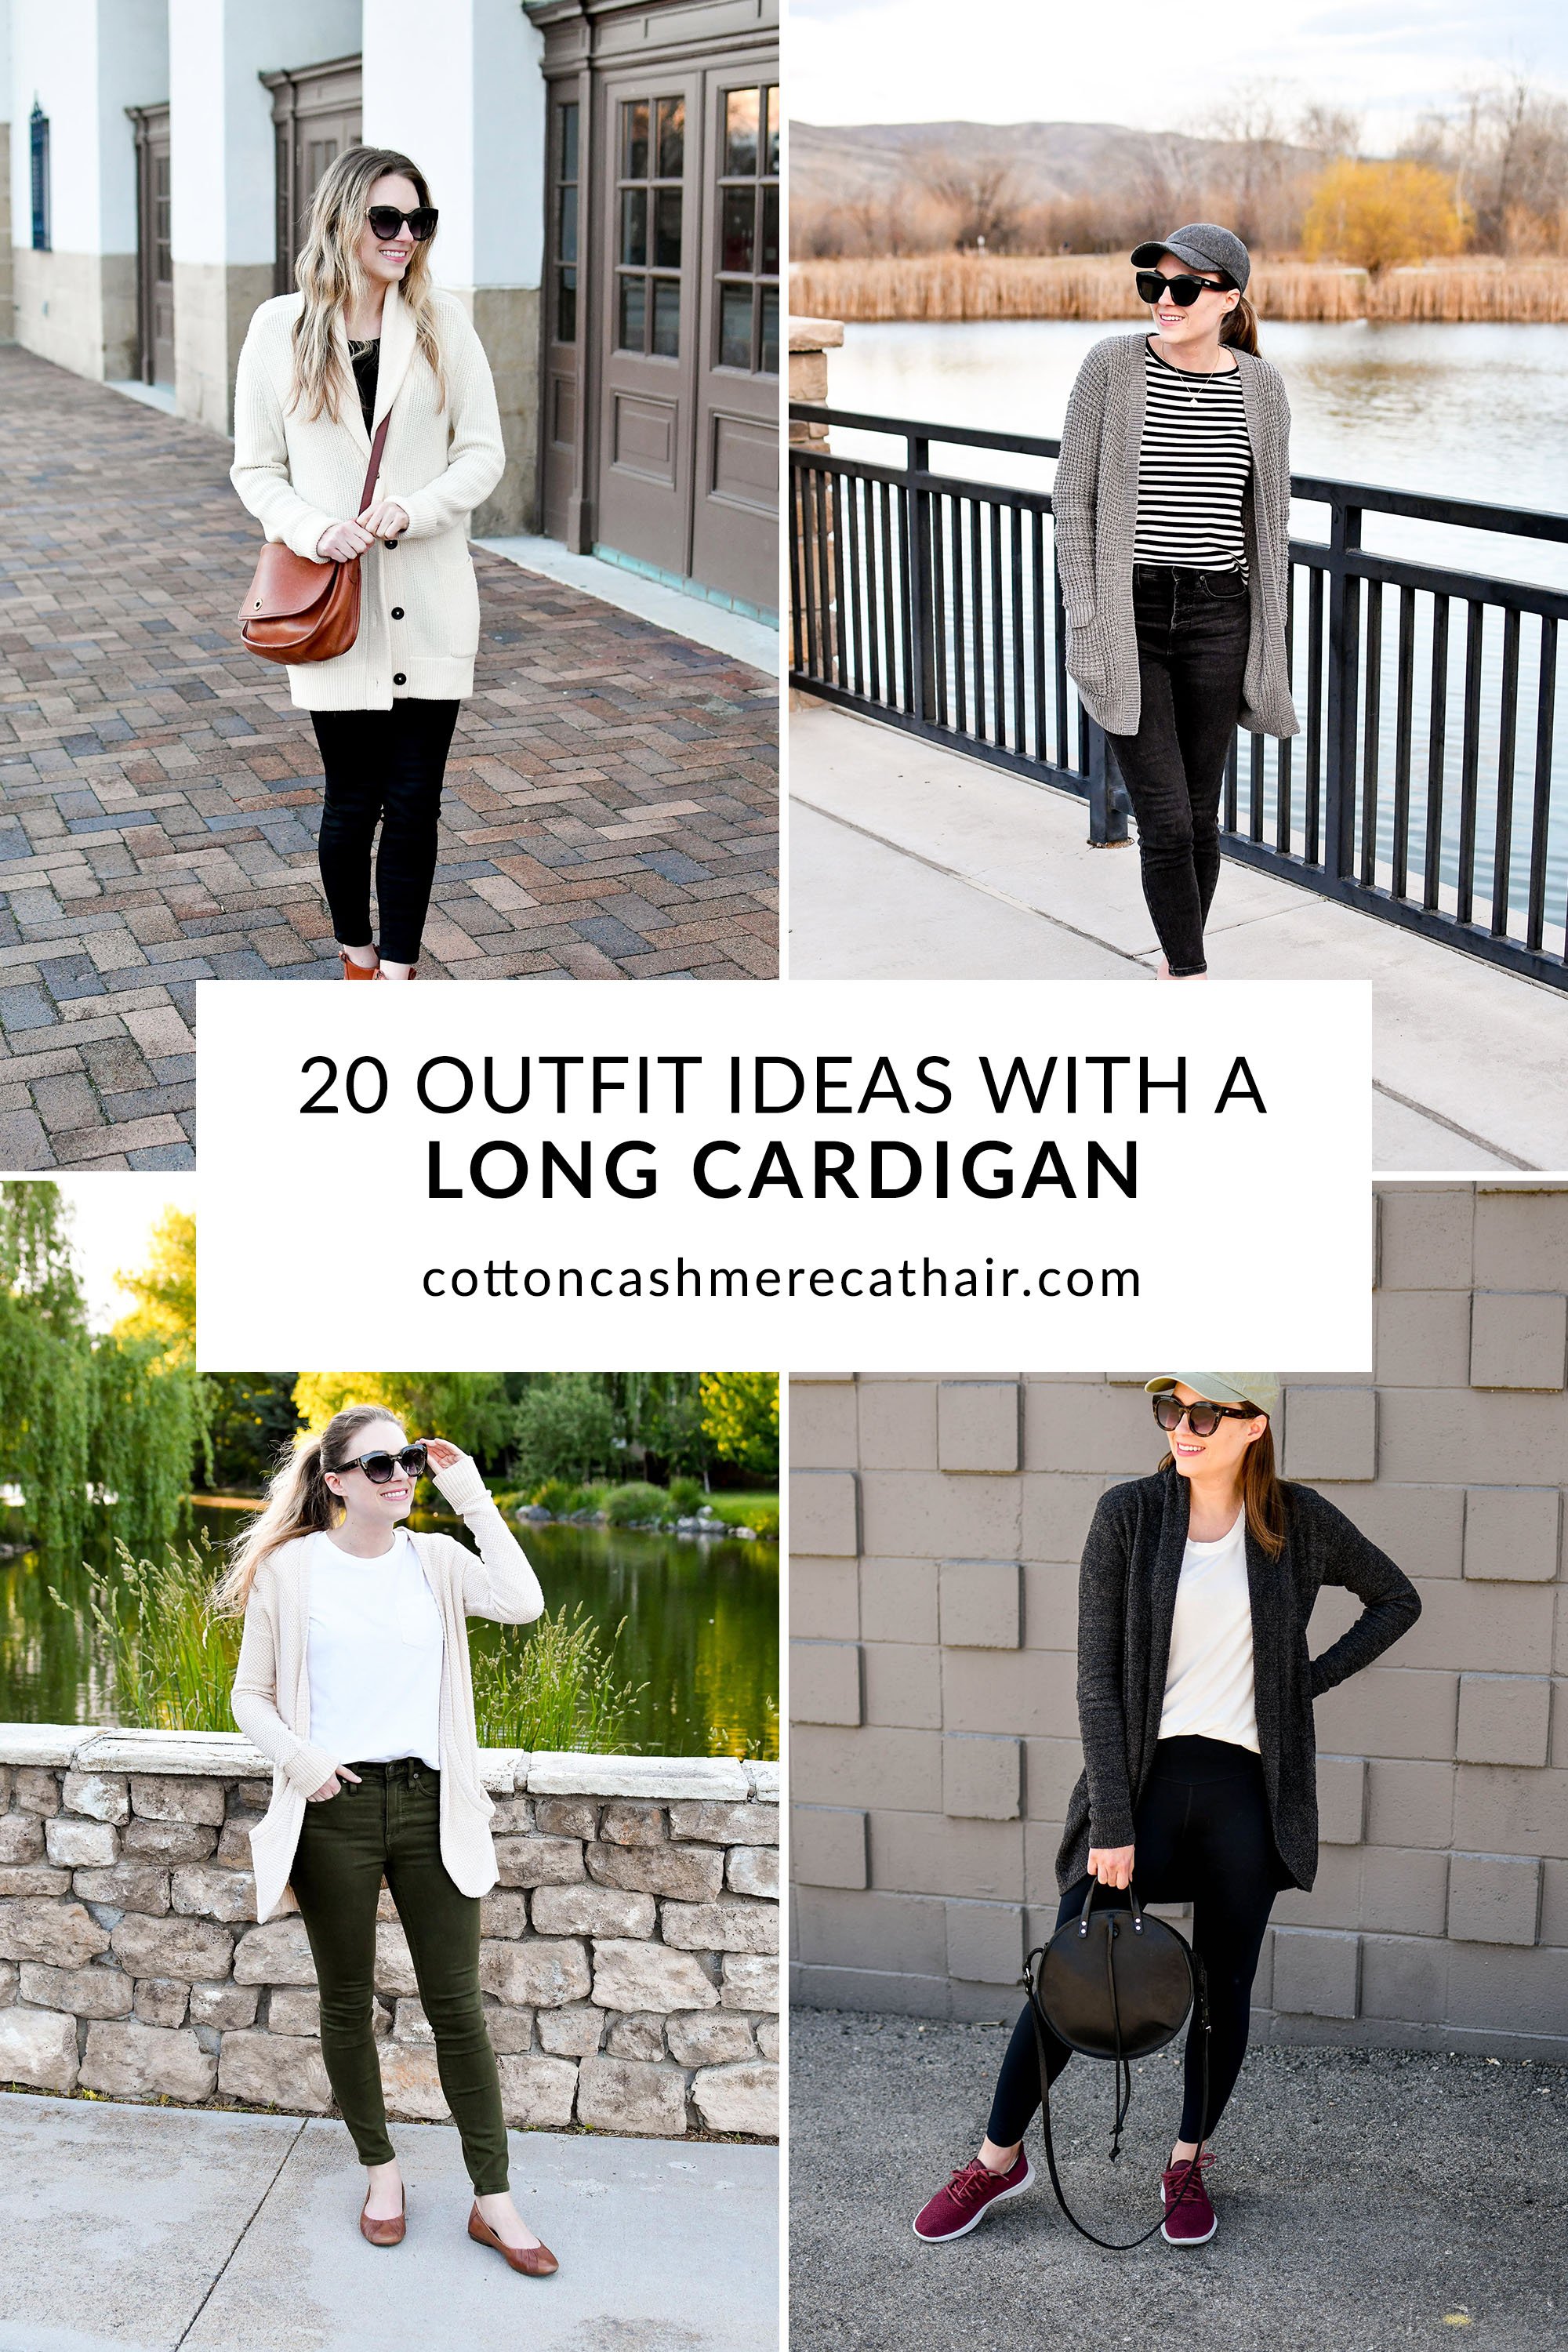 Jeg spiser morgenmad Ewell Få How to Wear a Long Cardigan (+ 20 Outfit Ideas!)